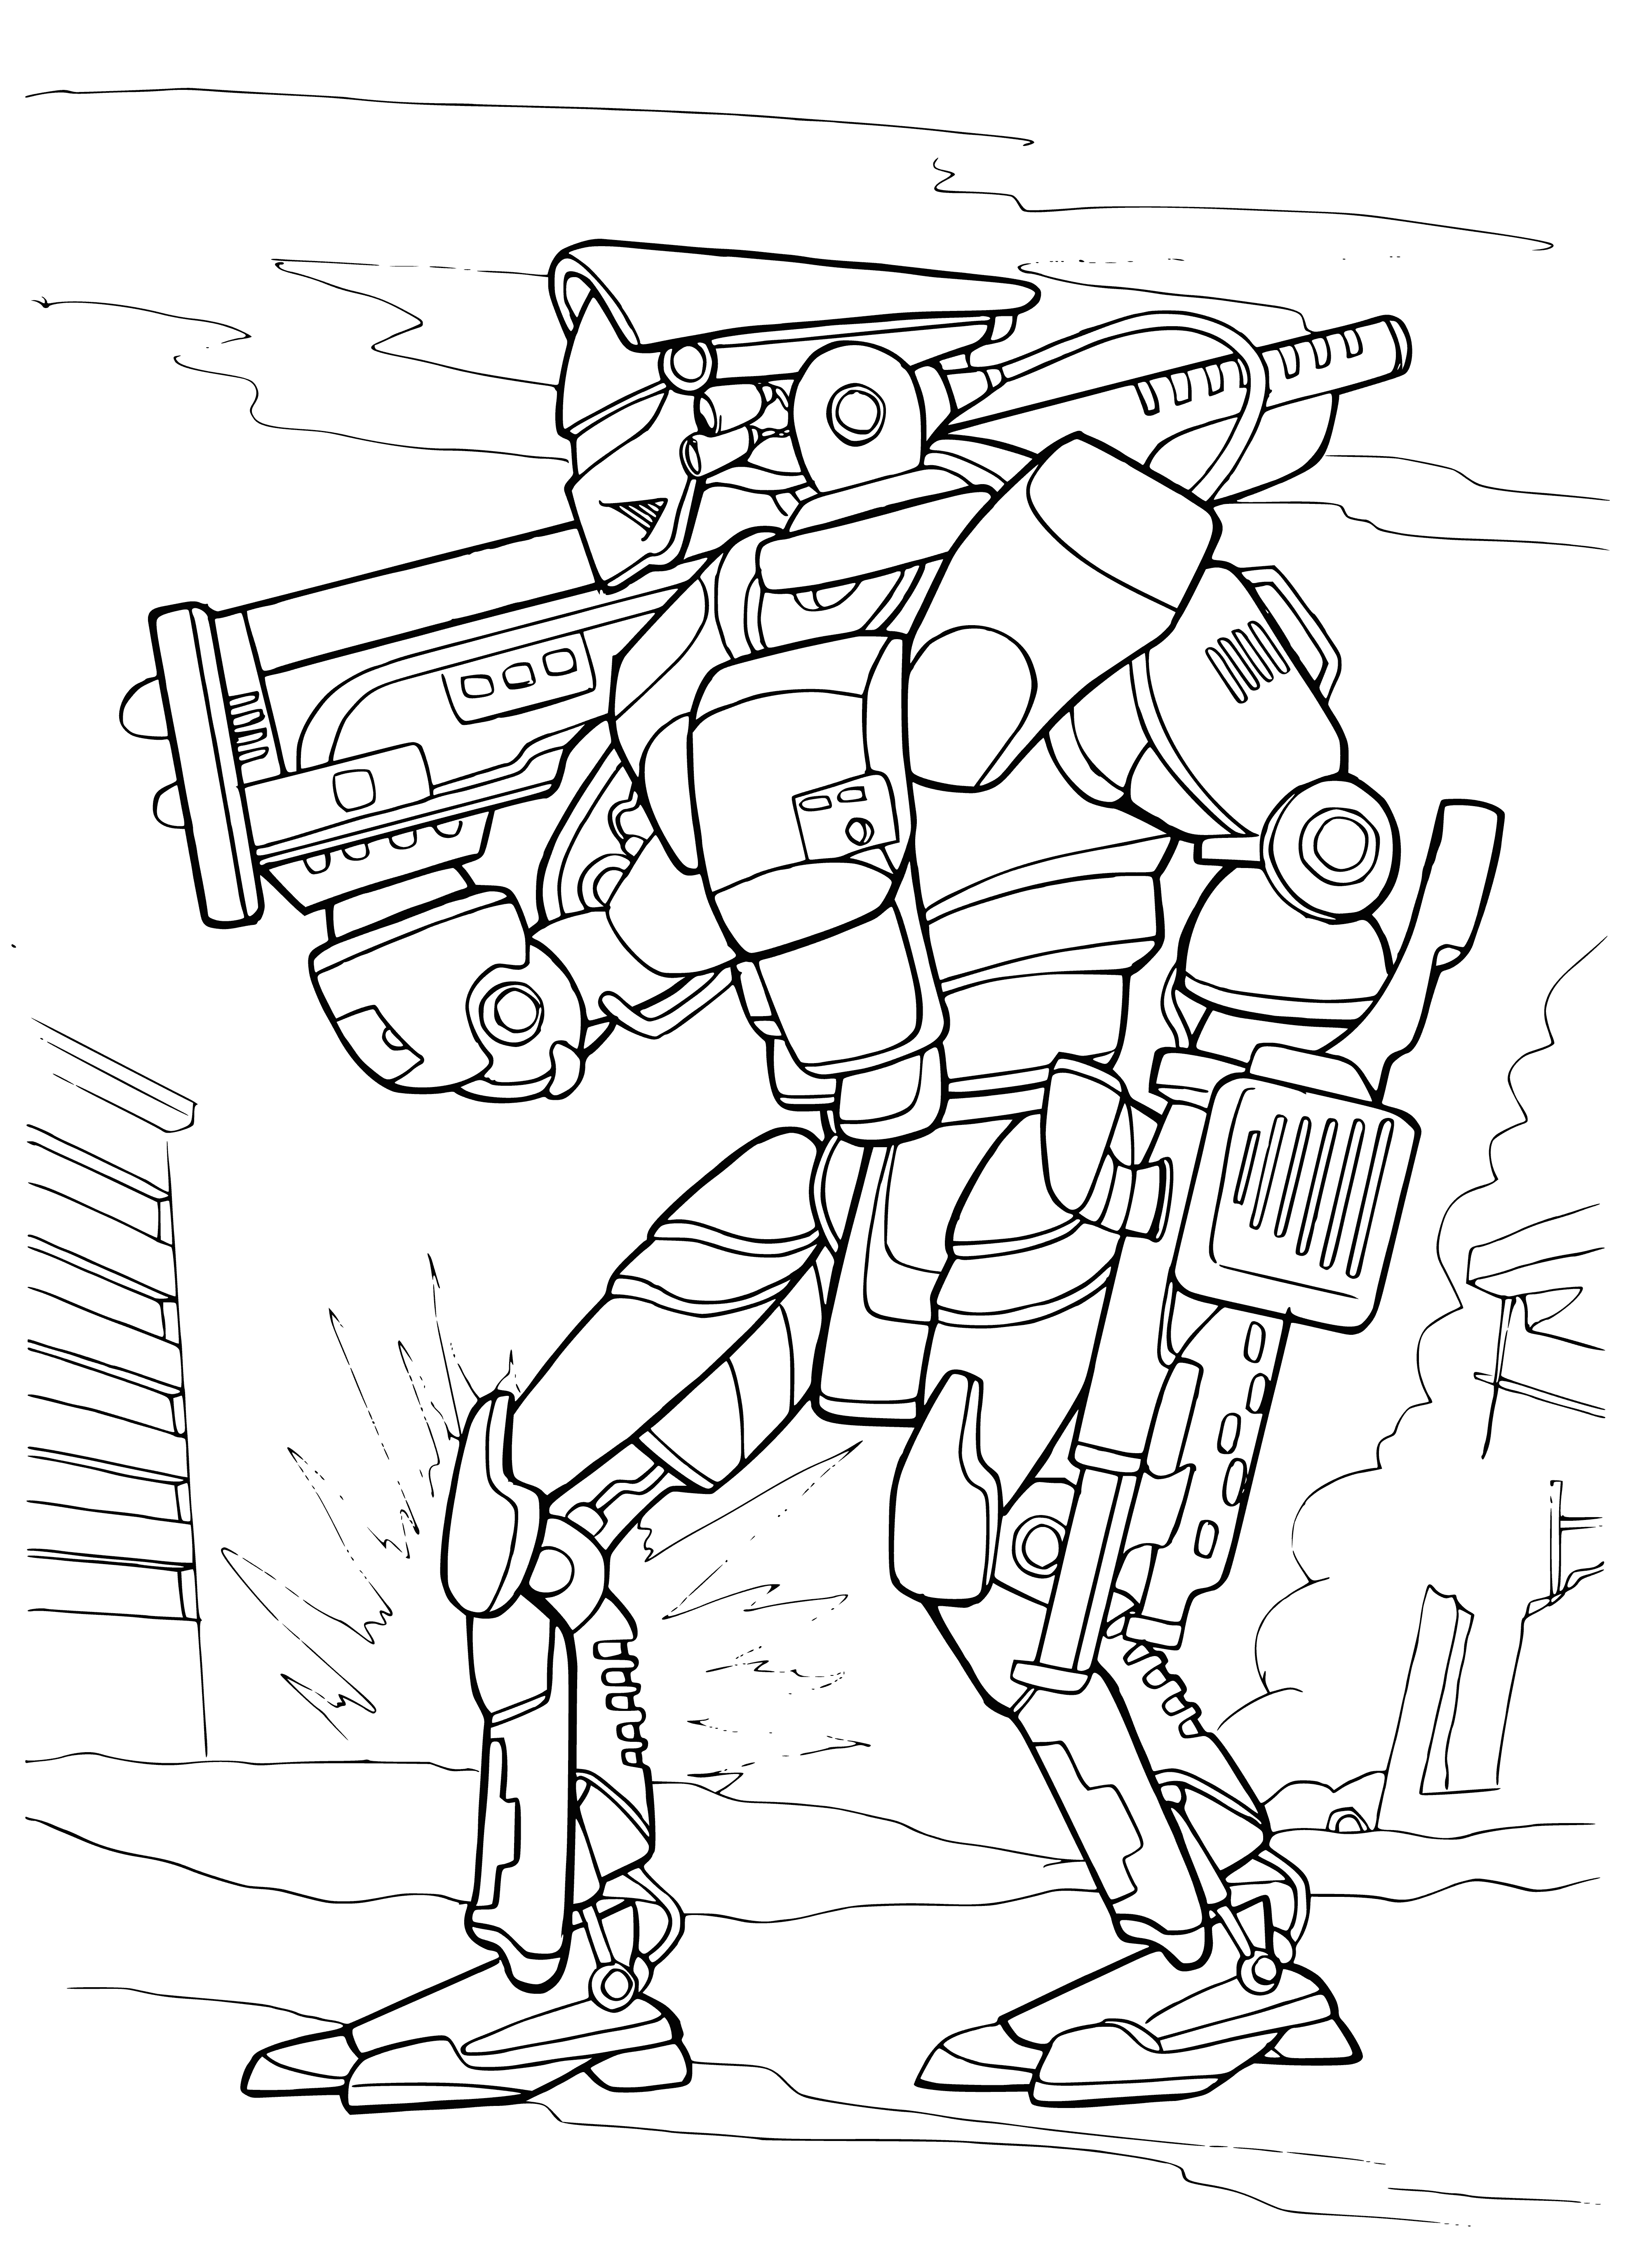 coloring page: Robots battle in a ruined field with weapons ranging from handheld guns to mounted machine guns. Damage from lasers & plasma bolts can be seen.